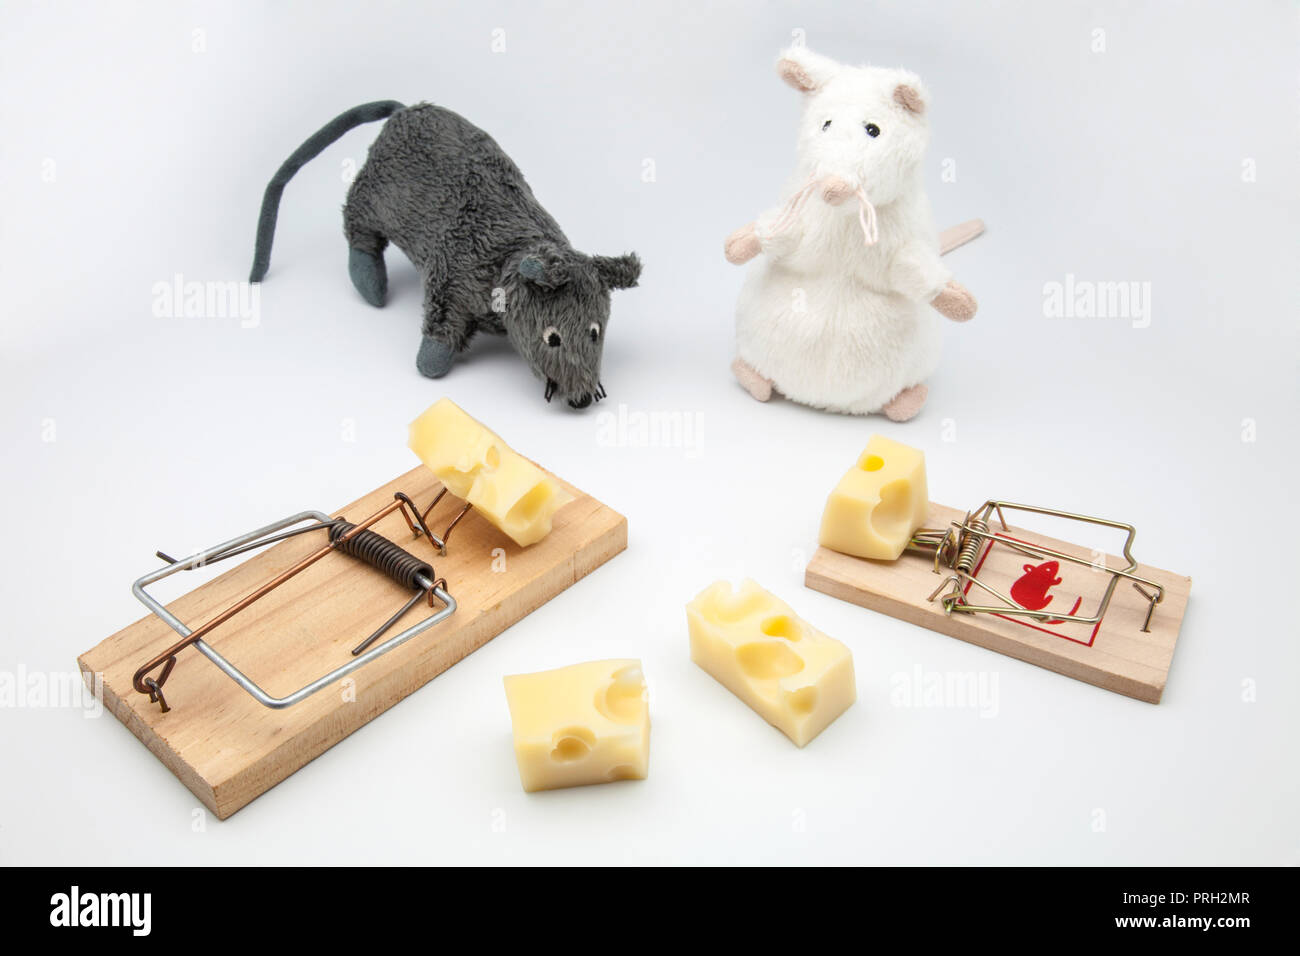 https://c8.alamy.com/comp/PRH2MR/mice-and-rat-traps-with-cheese-on-white-background-PRH2MR.jpg